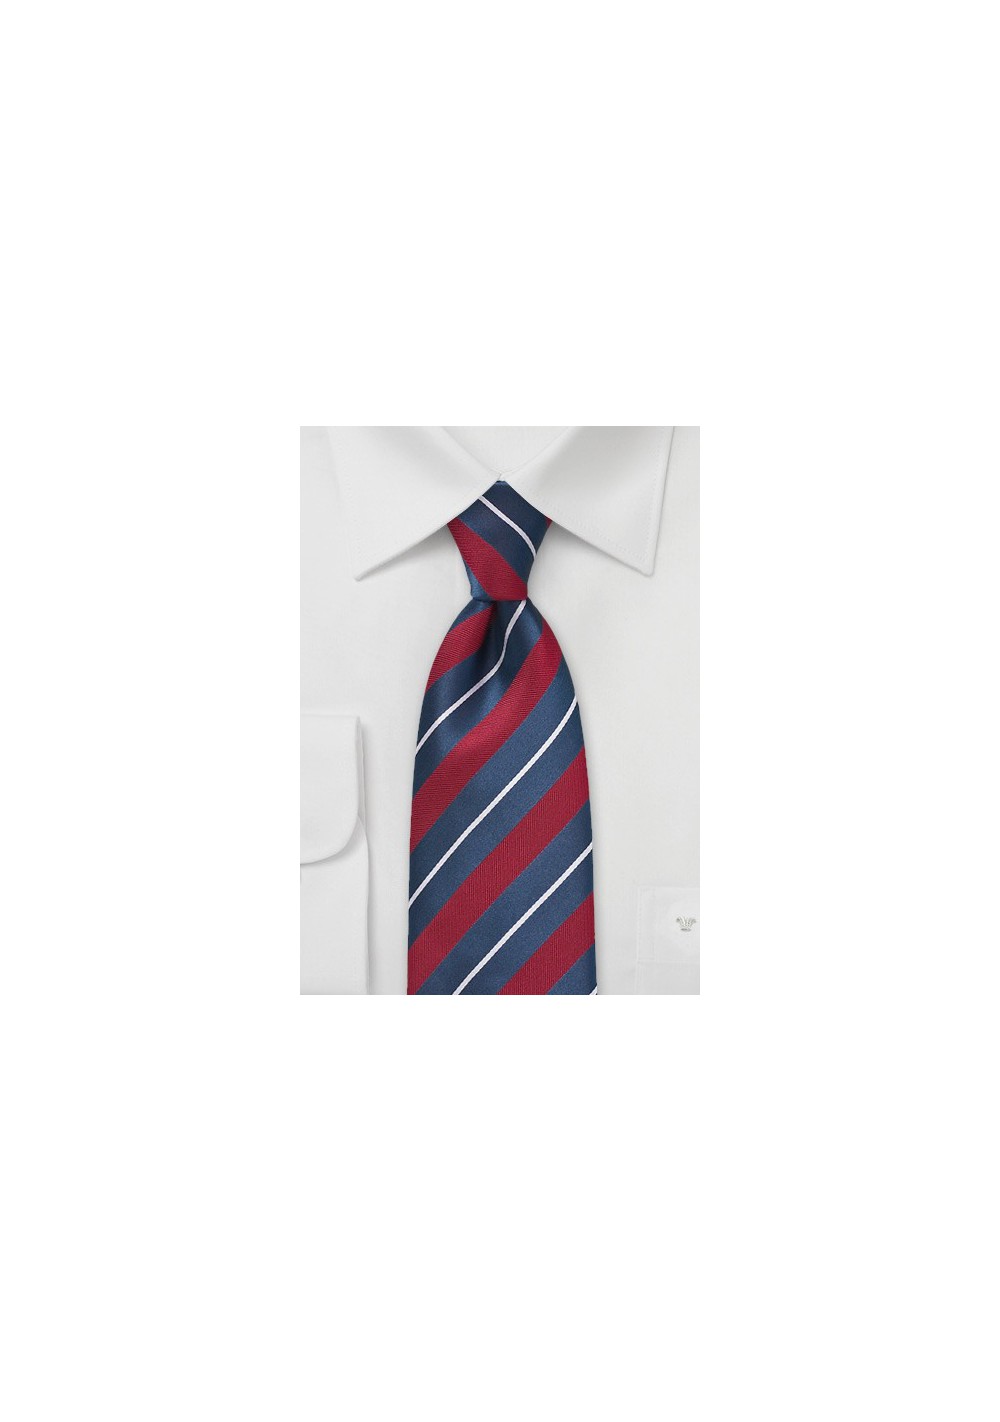 Tailored Red and Blue Striped Tie